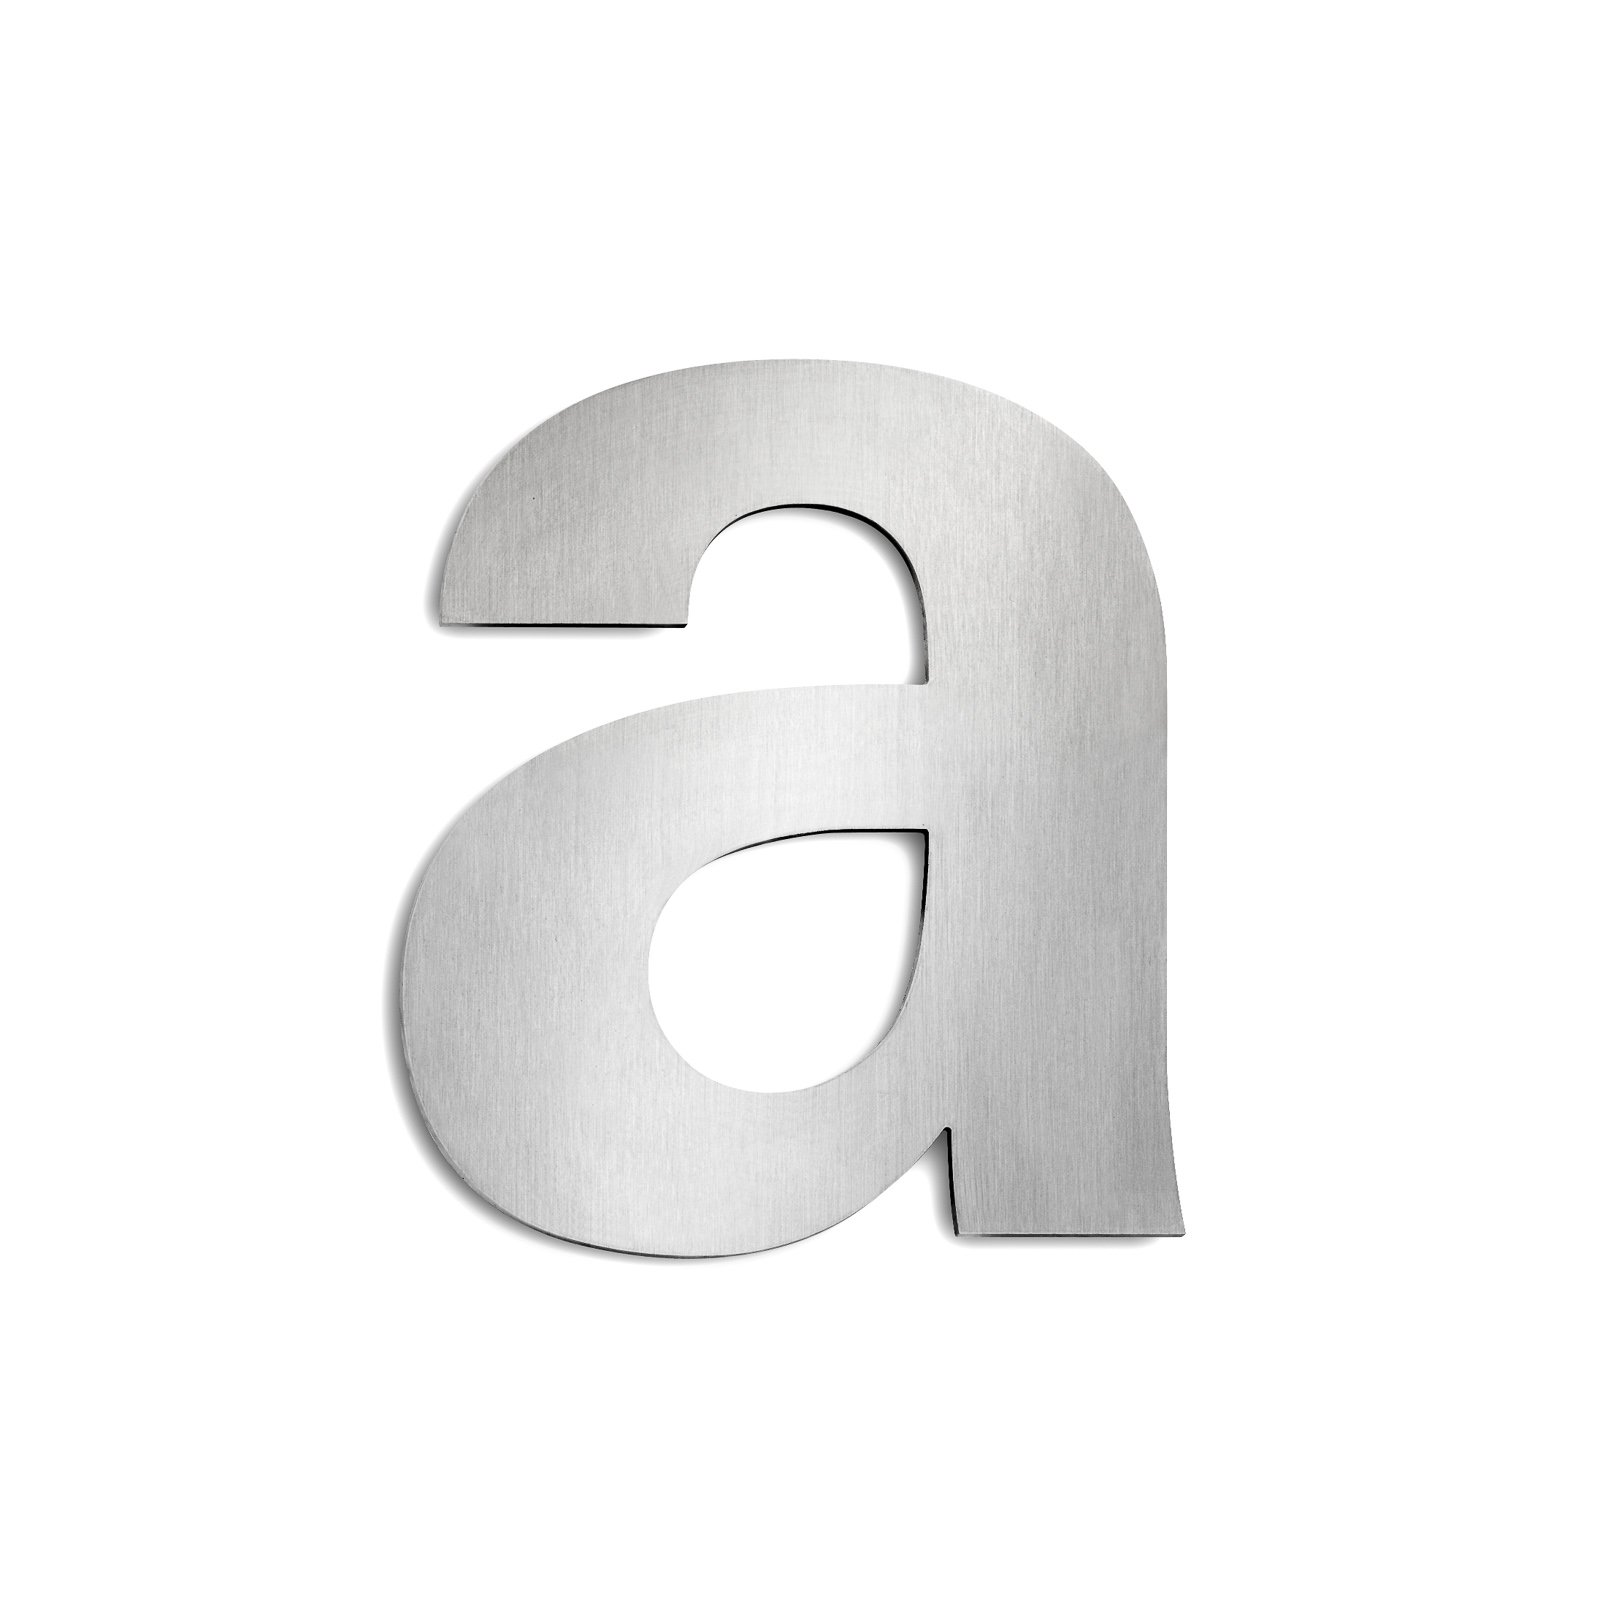 Large stainless steel house numbers - letter a